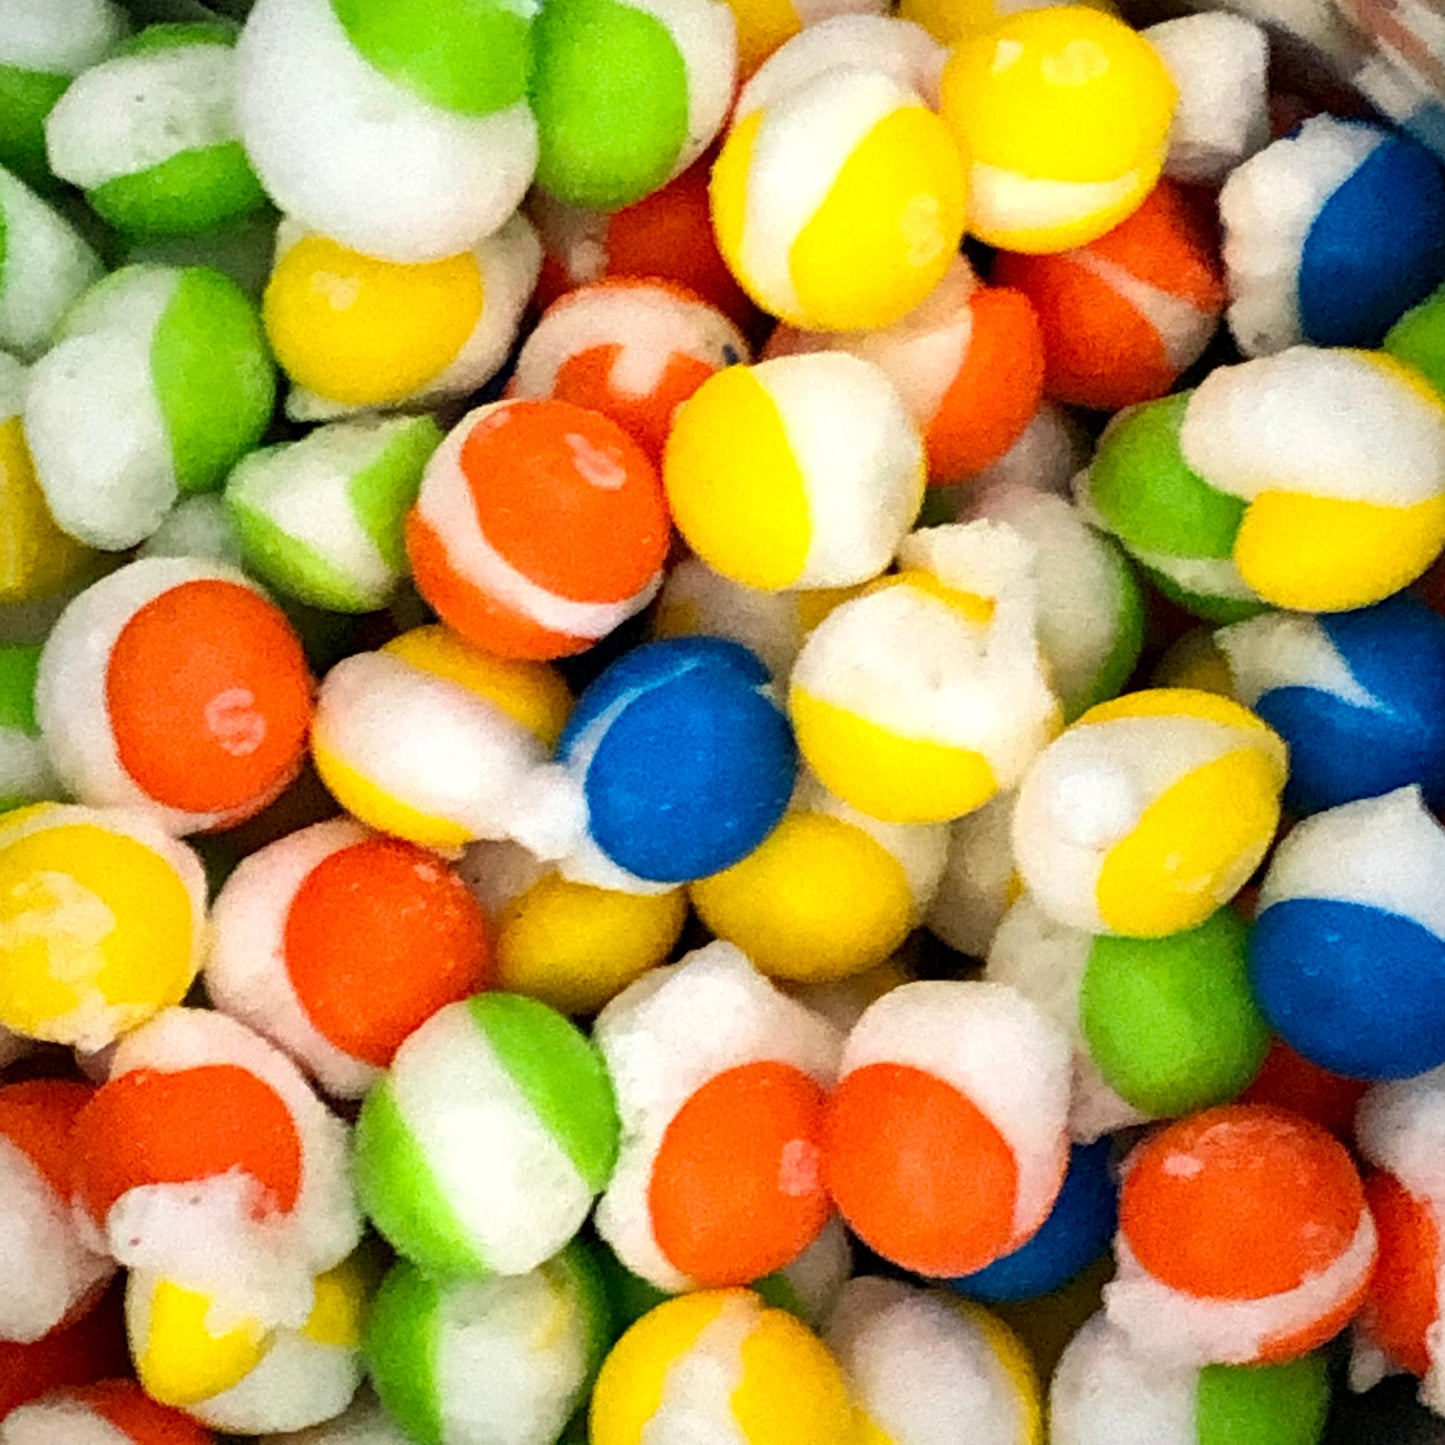 $1 PACKS! ComestibleCreations Freeze Dried Candy! - Assorted